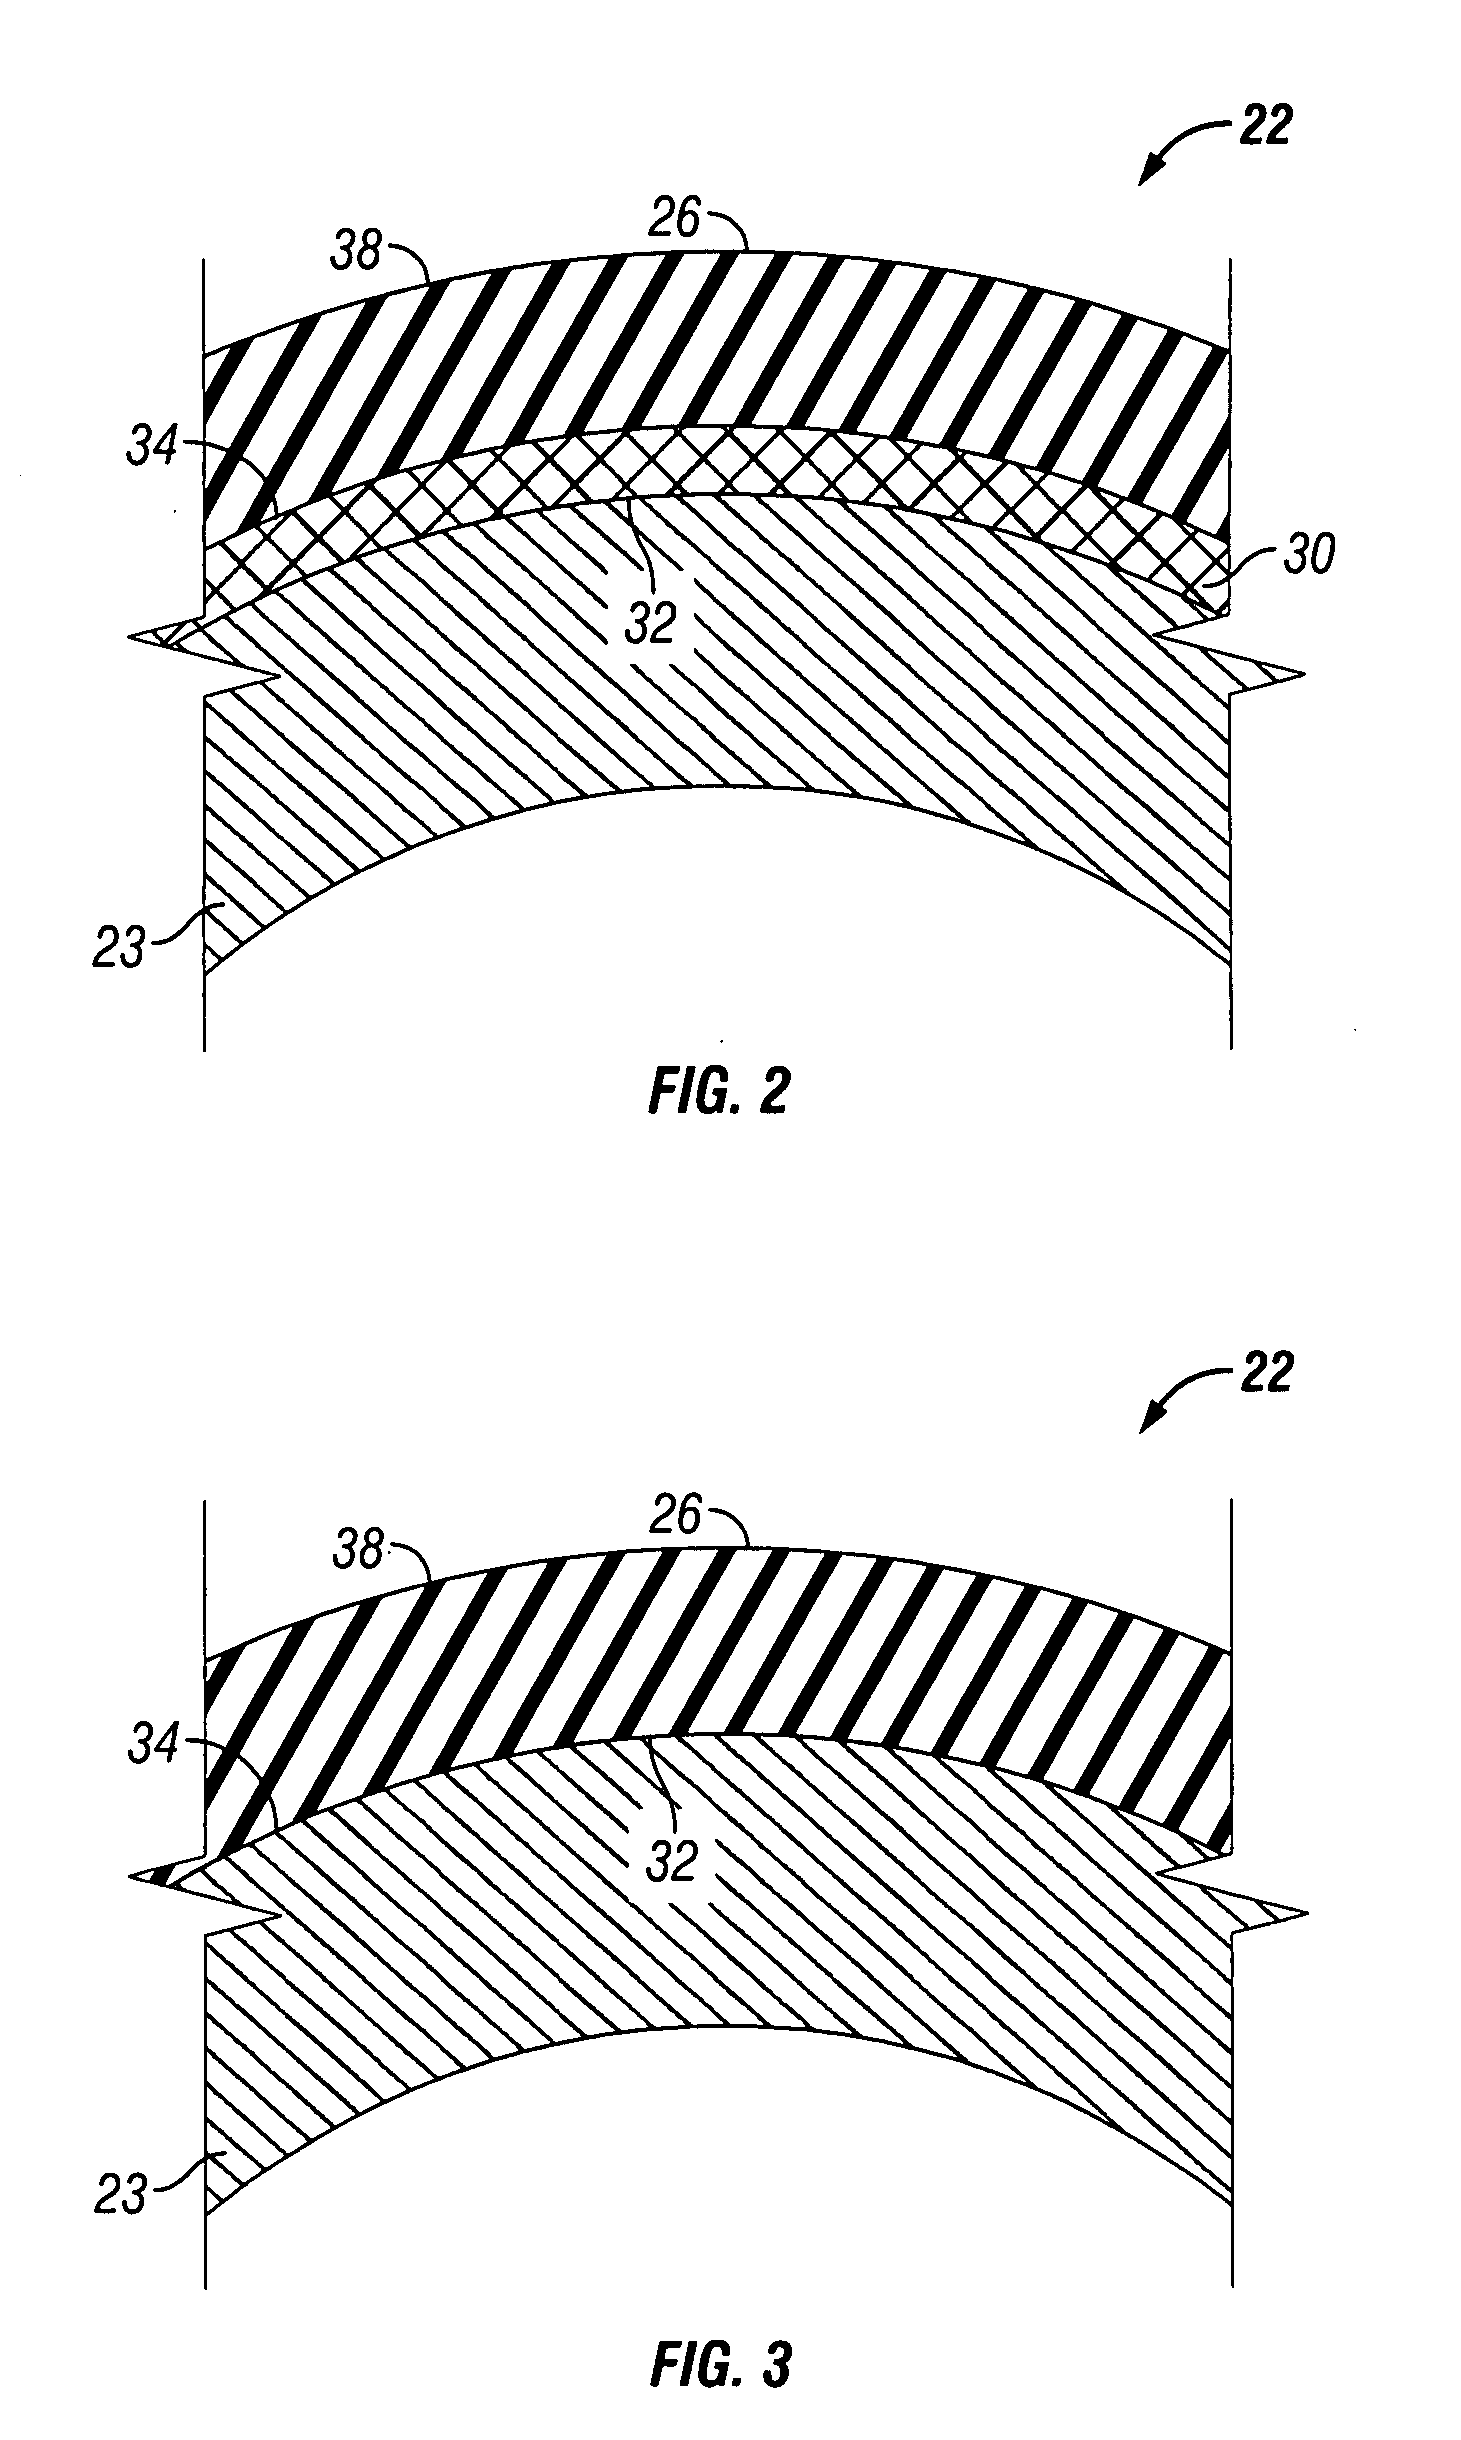 Sealing material to metal bonding compositions and methods for bonding a sealing material to a metal surface